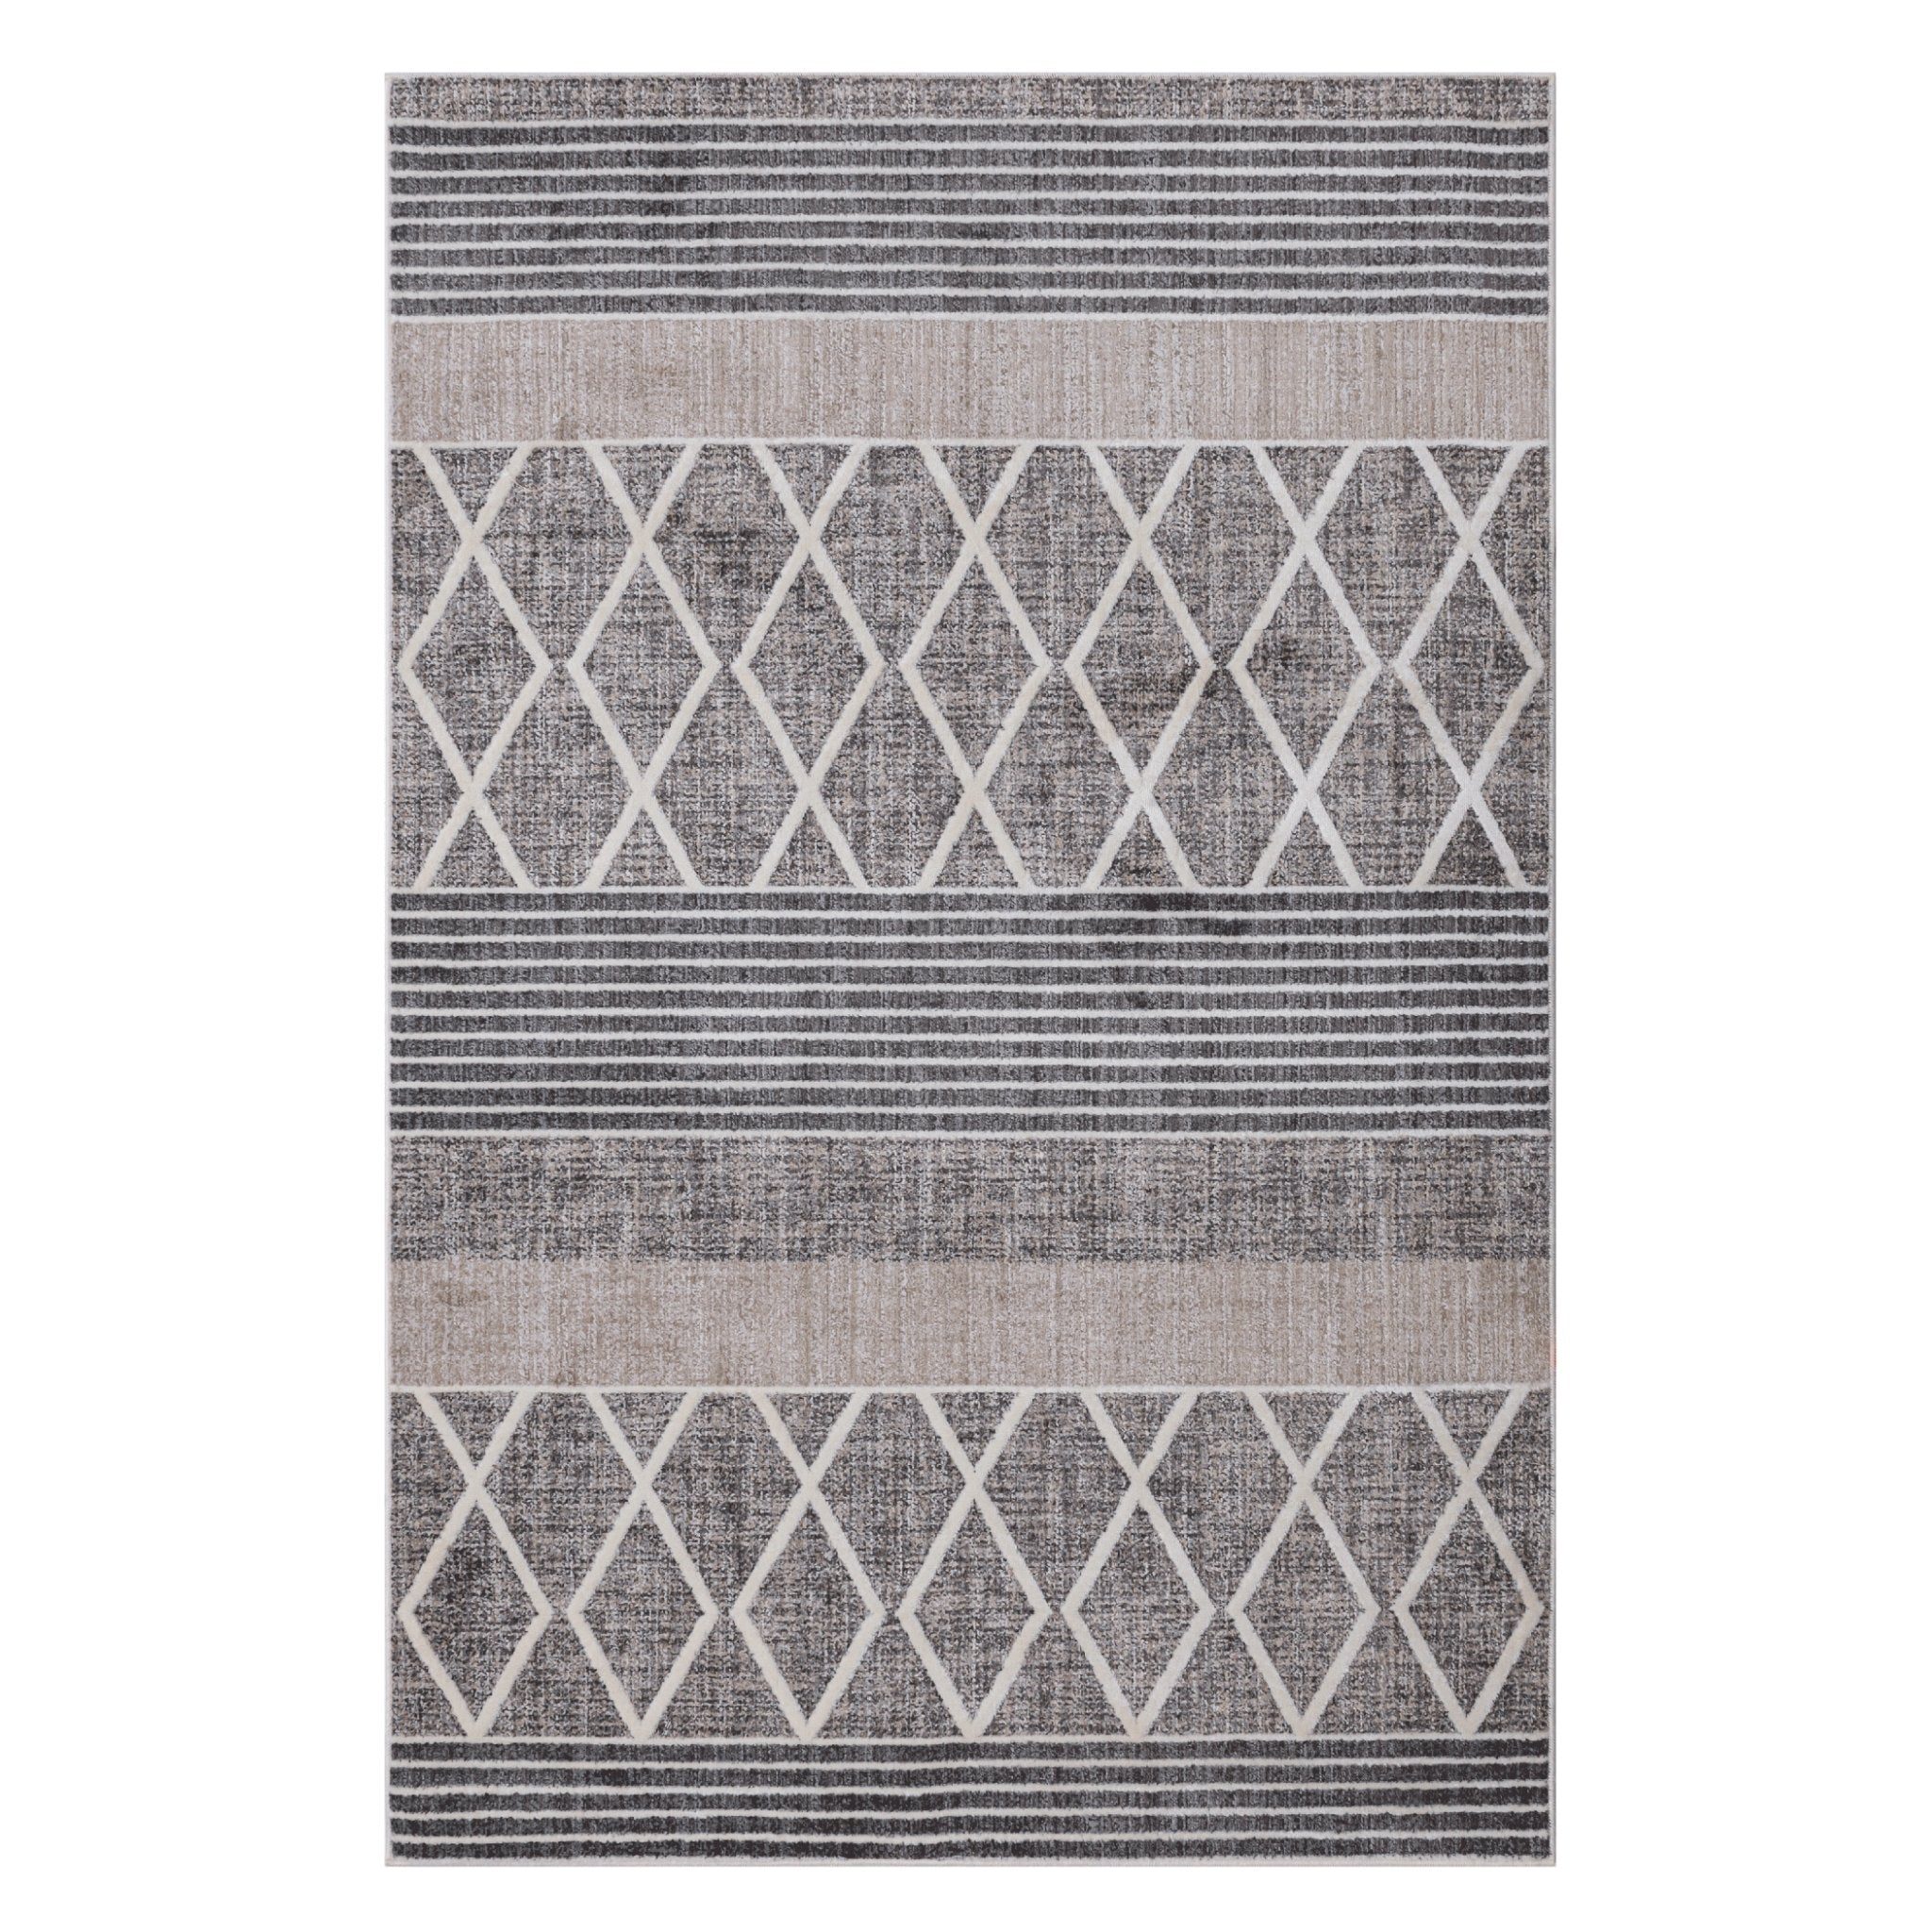 Shop for Stylish Rugs Online in Canada - Berre Furniture